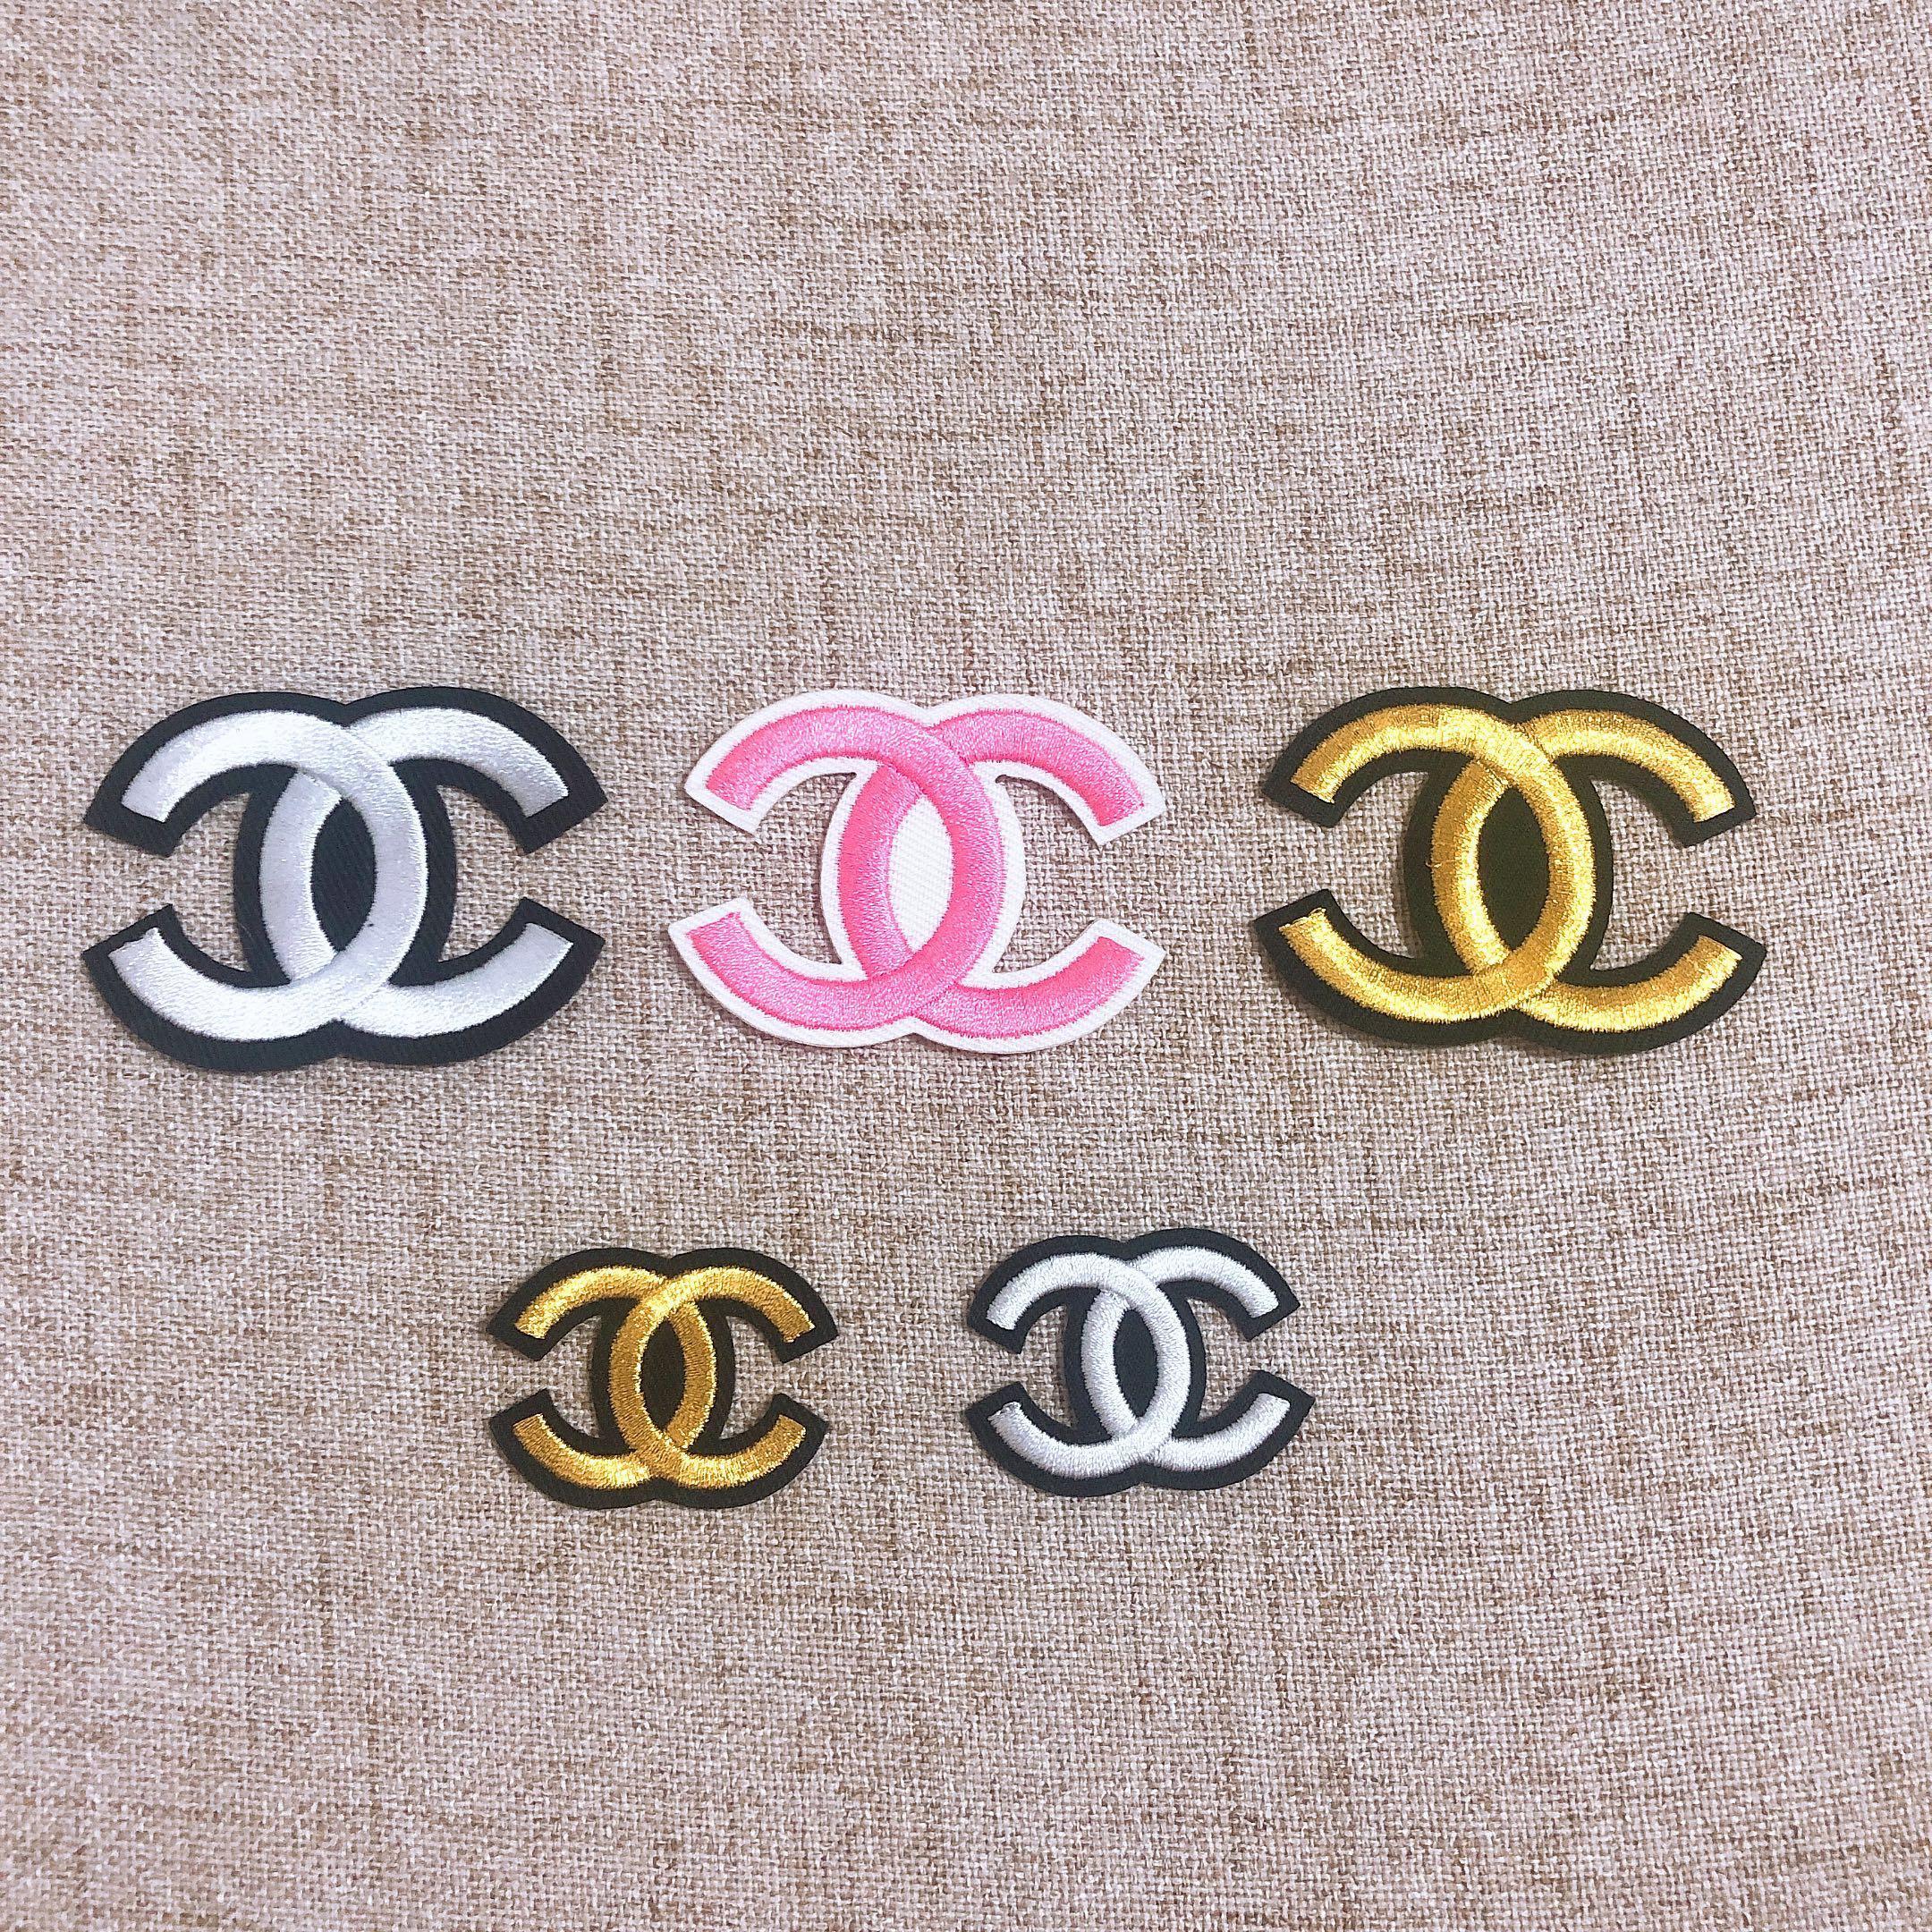 Iron On Patches (Chanel, CDG, Champion)